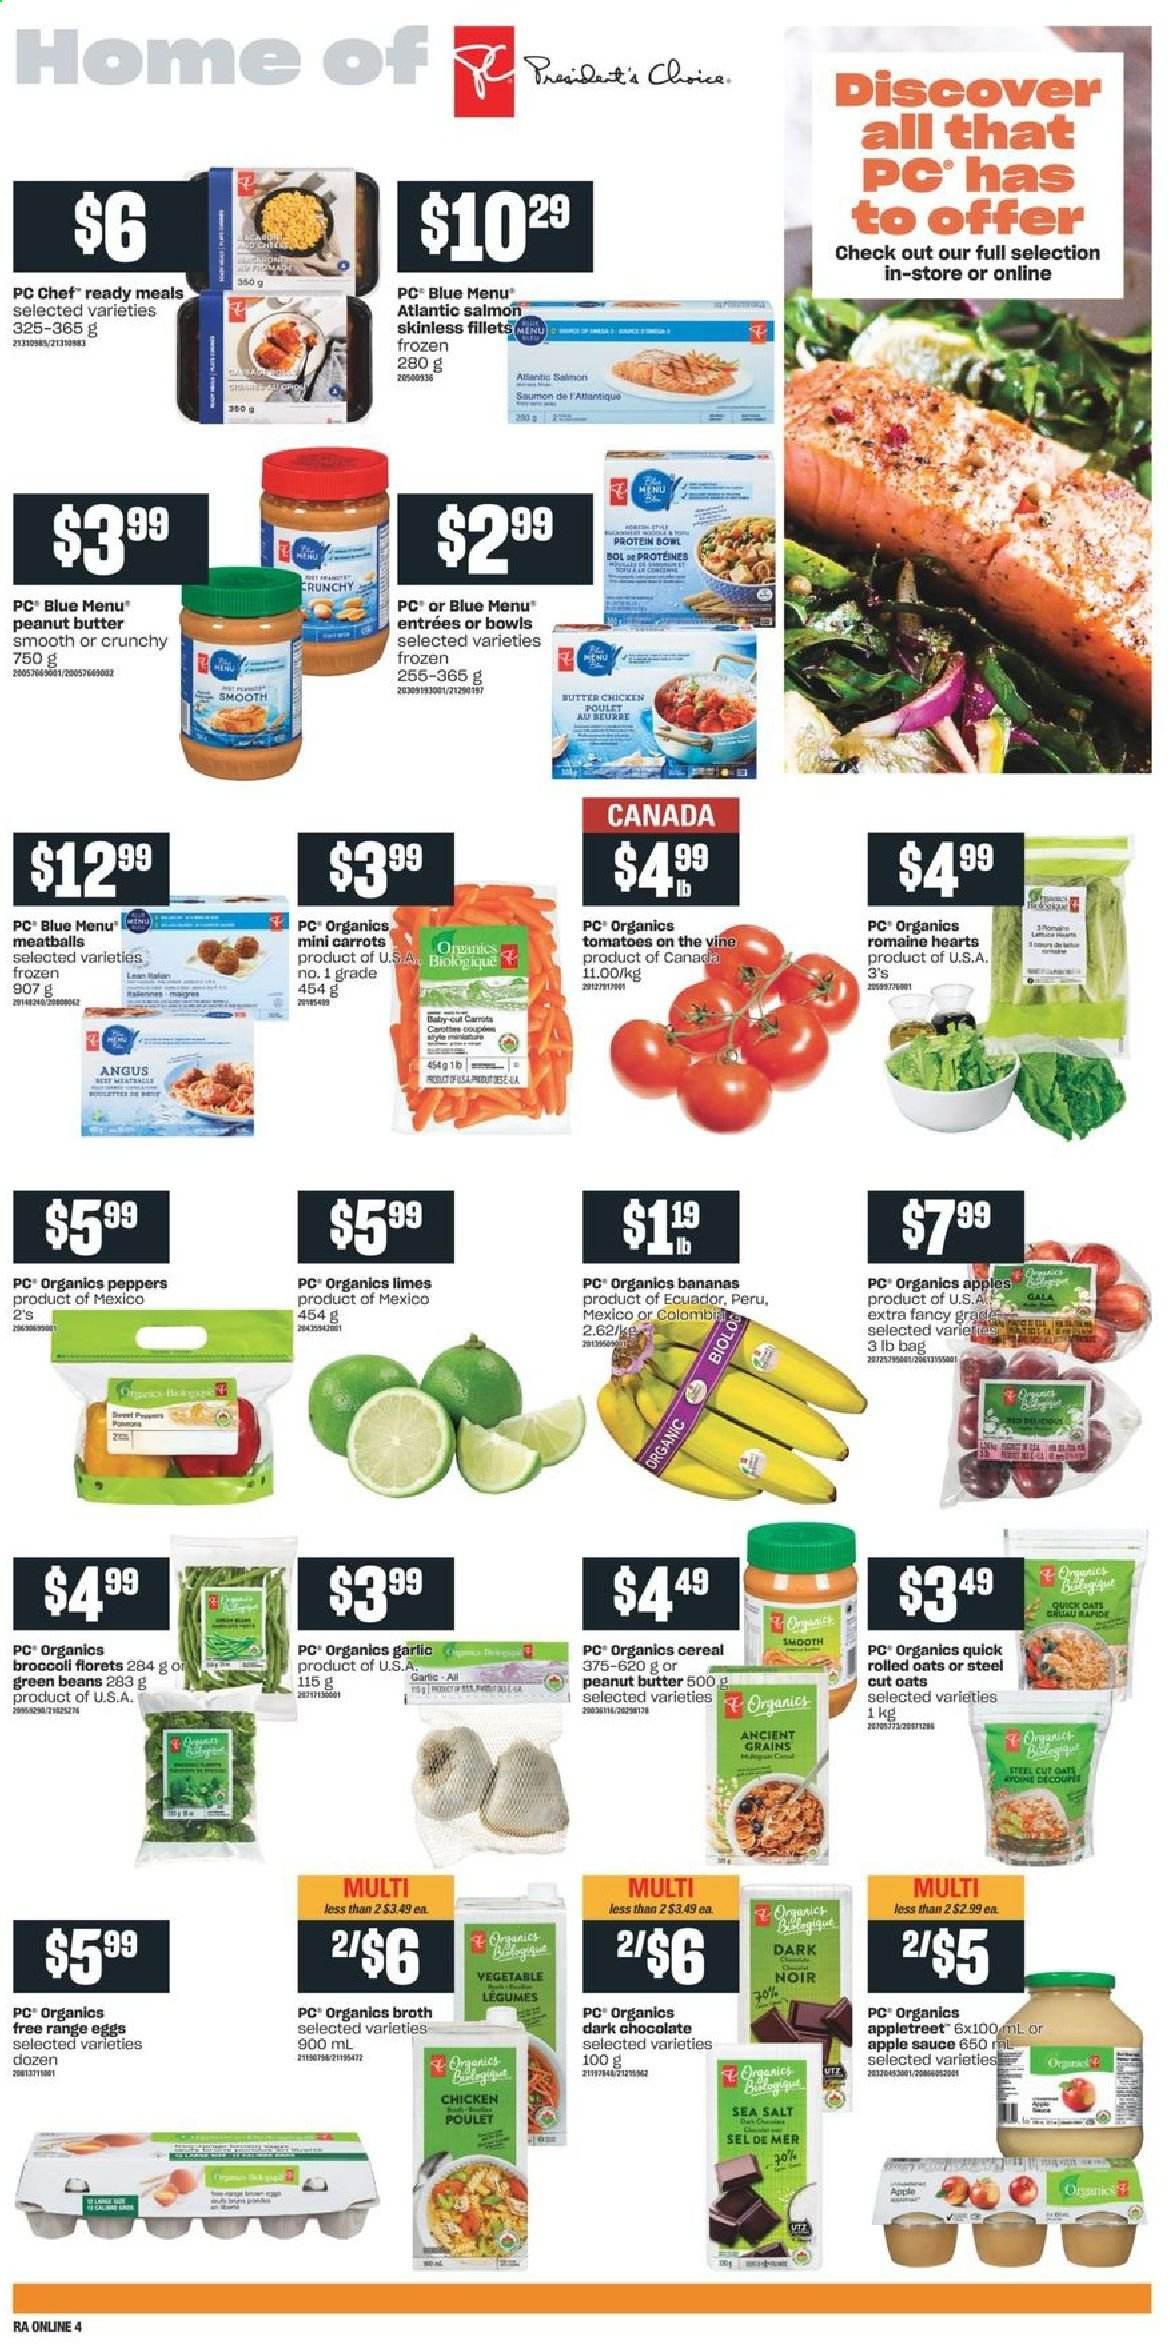 Atlantic Superstore flyer  - January 14, 2021 - January 20, 2021. Page 8.